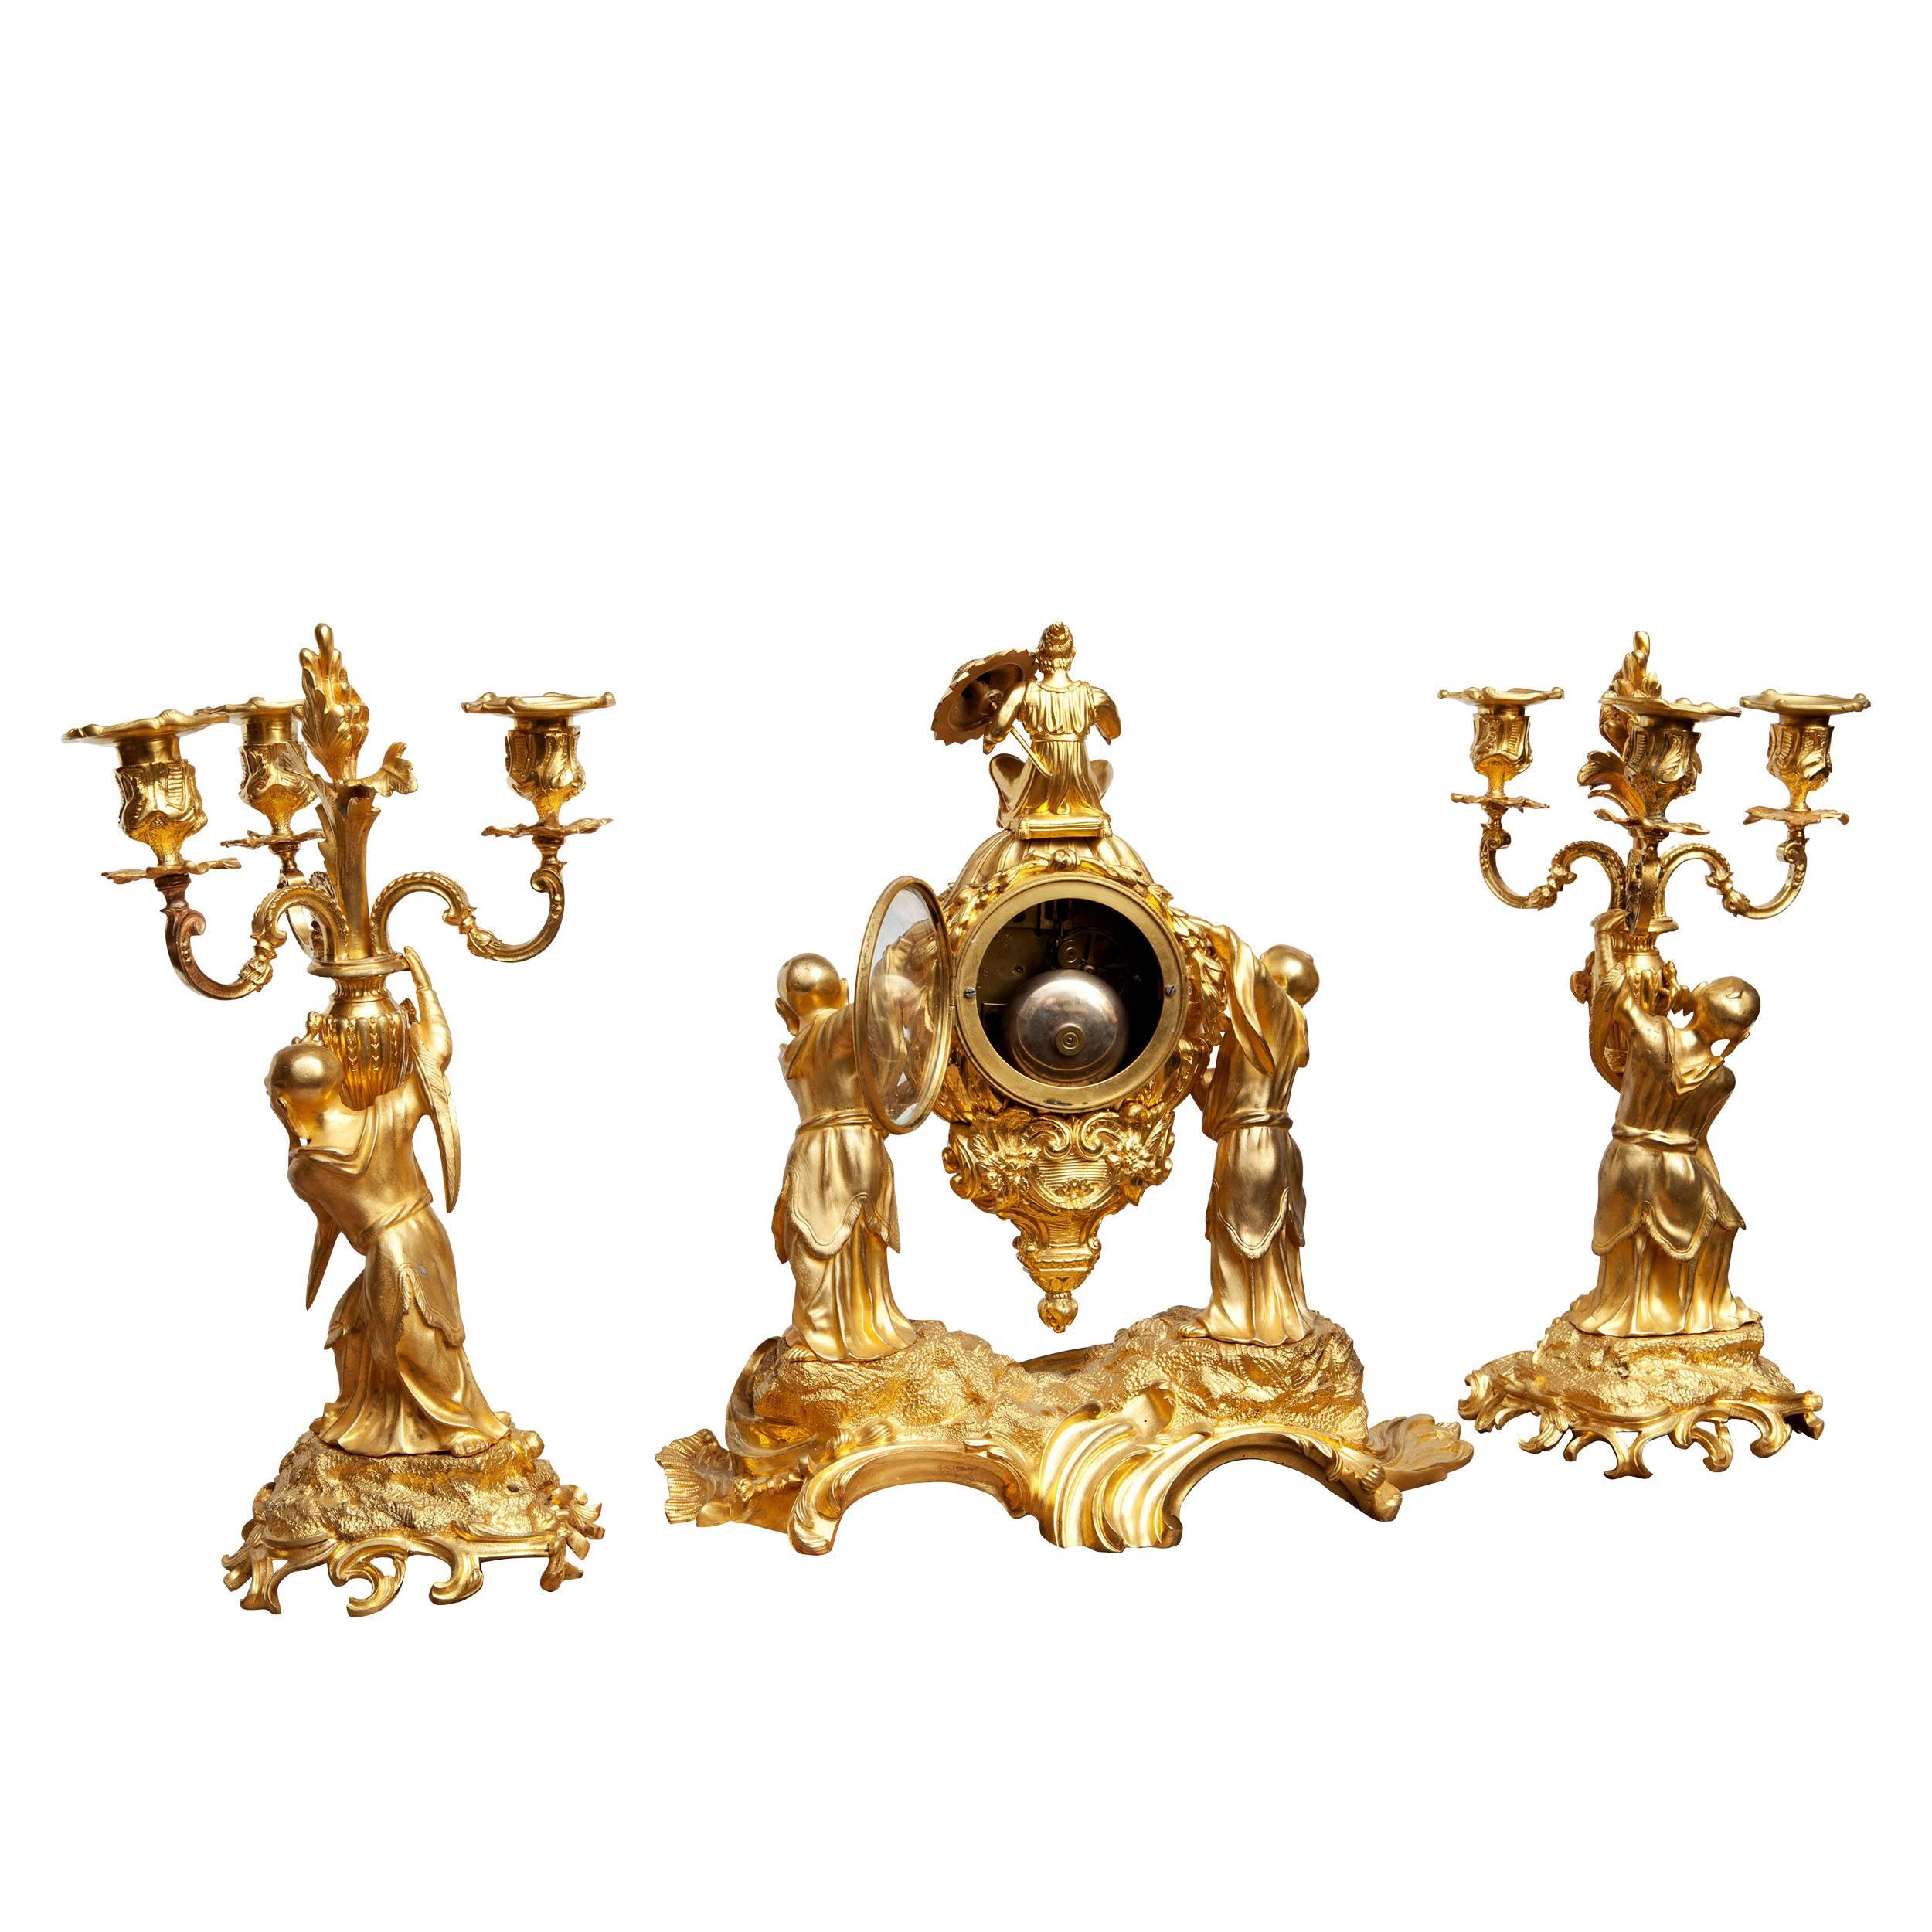 Chinoiserie Clock Garniture by Charles Du Tertre, Paris In Excellent Condition In London, by appointment only